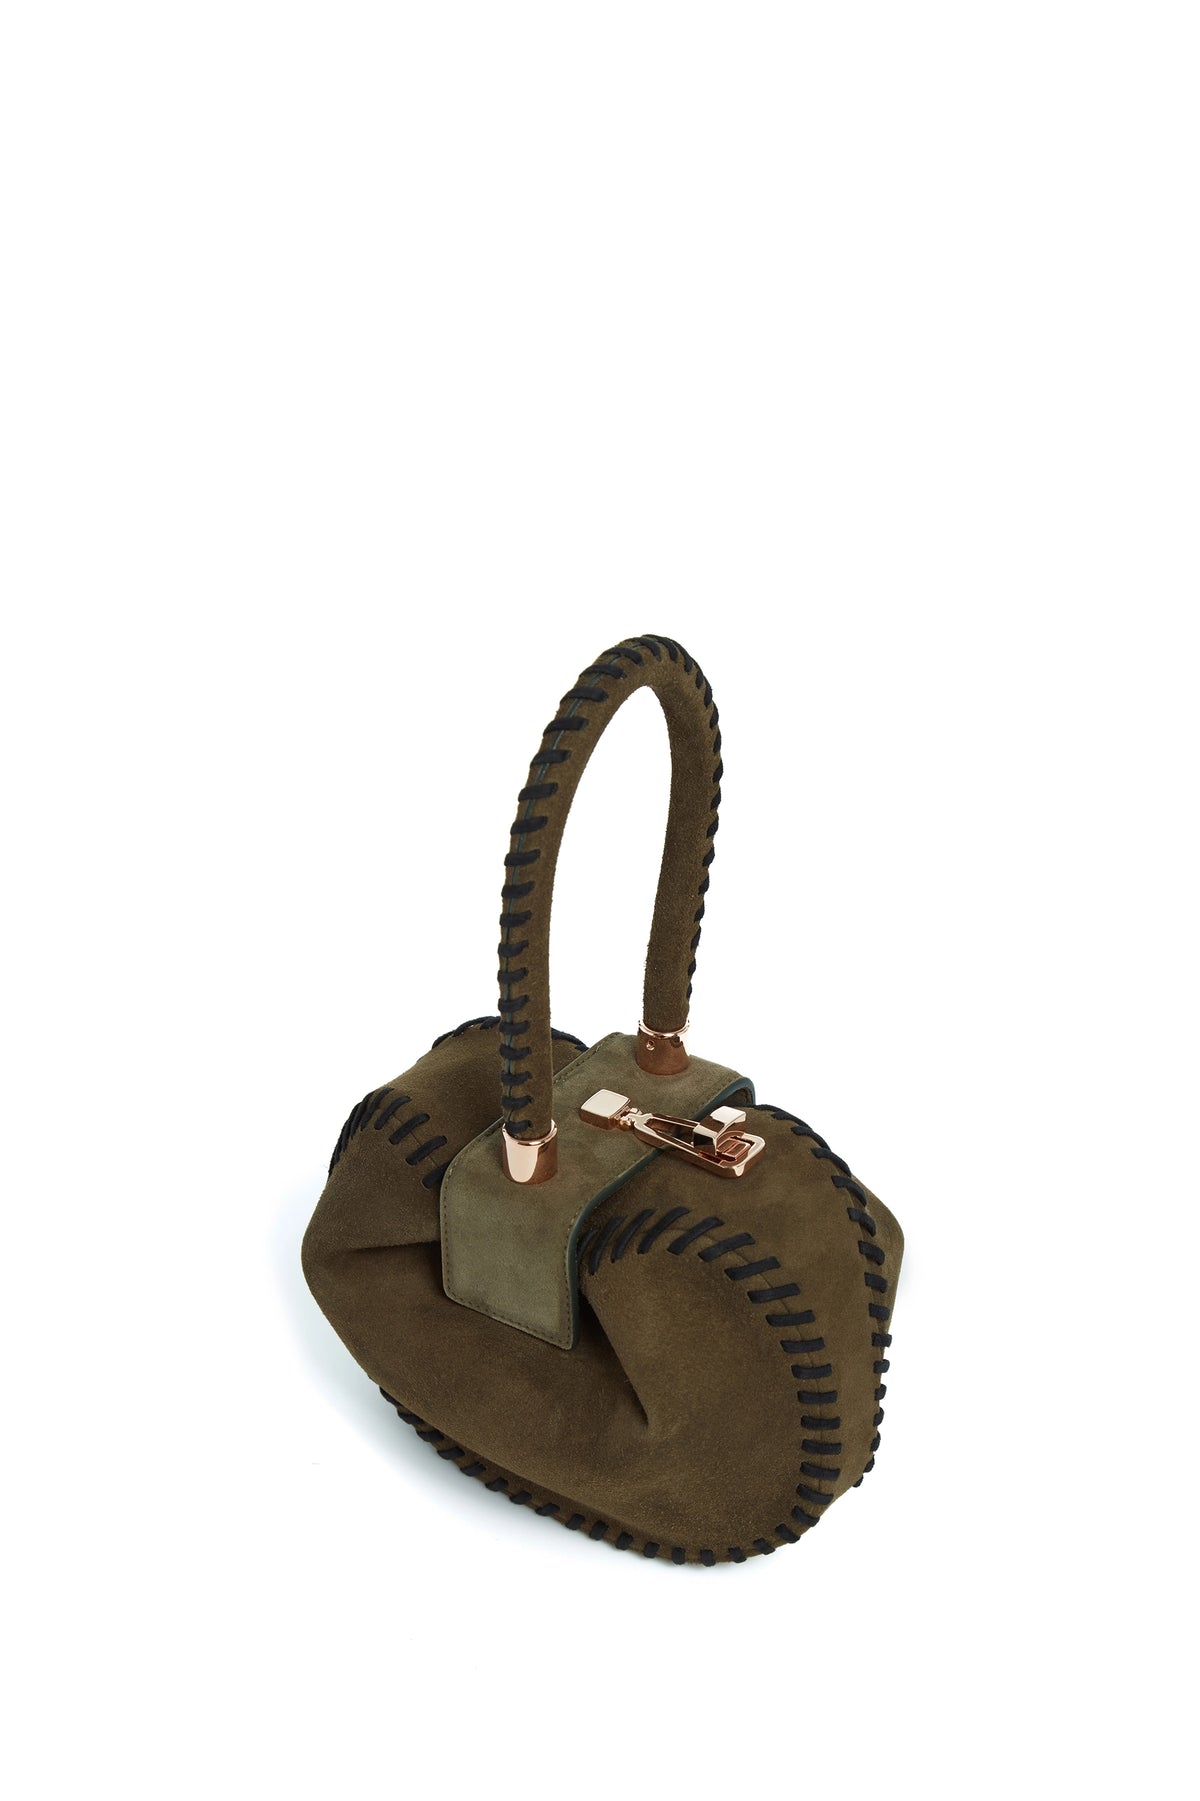 Whipstitch Demi Bag in Olive Suede